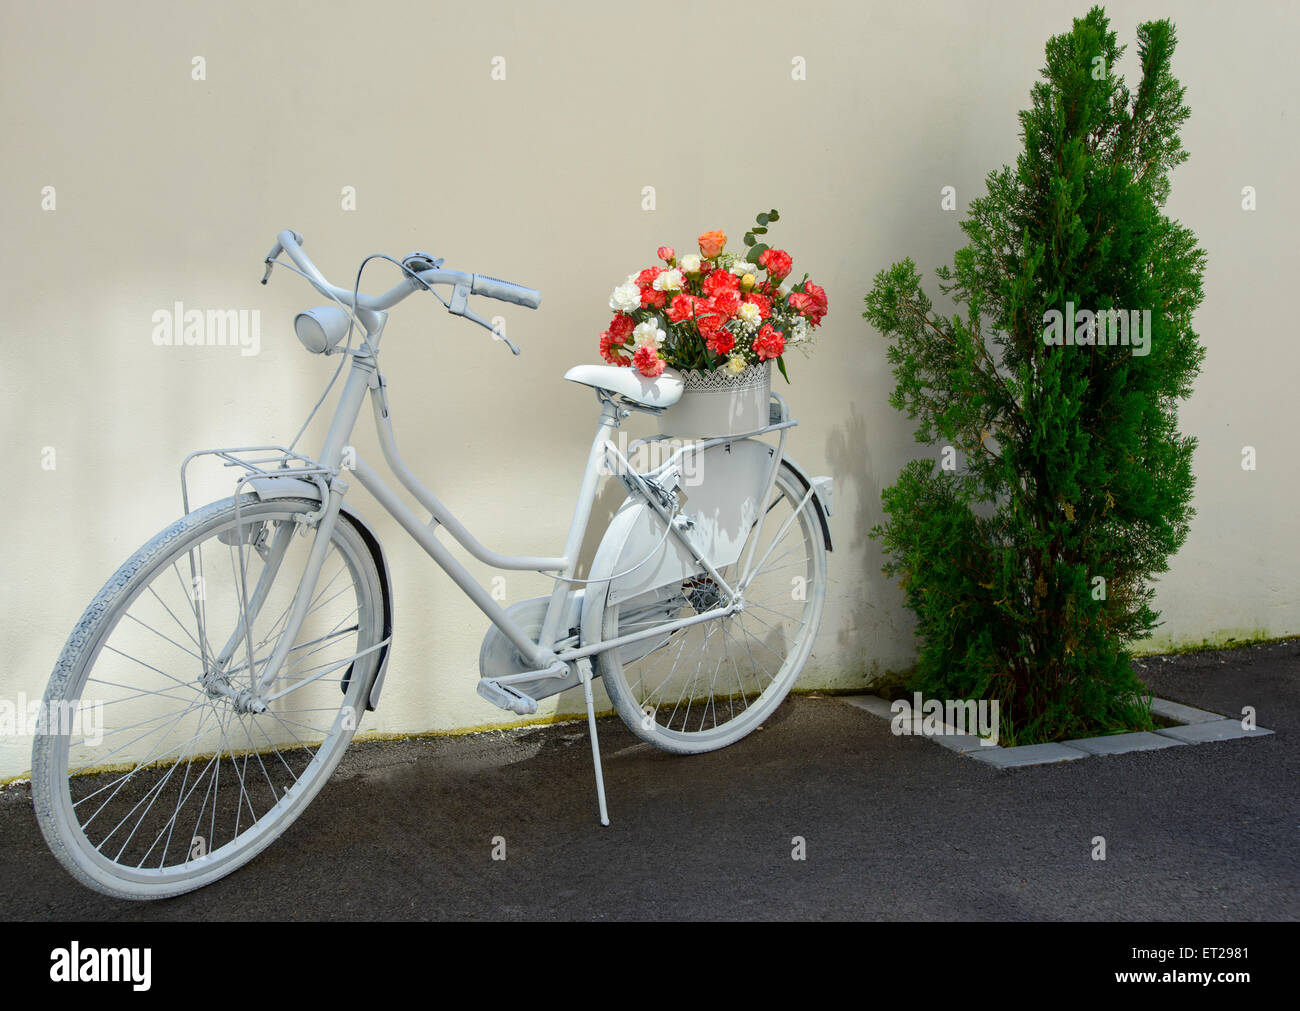 ladies bicycle with flowers decoration outdoor bike Stock Photo